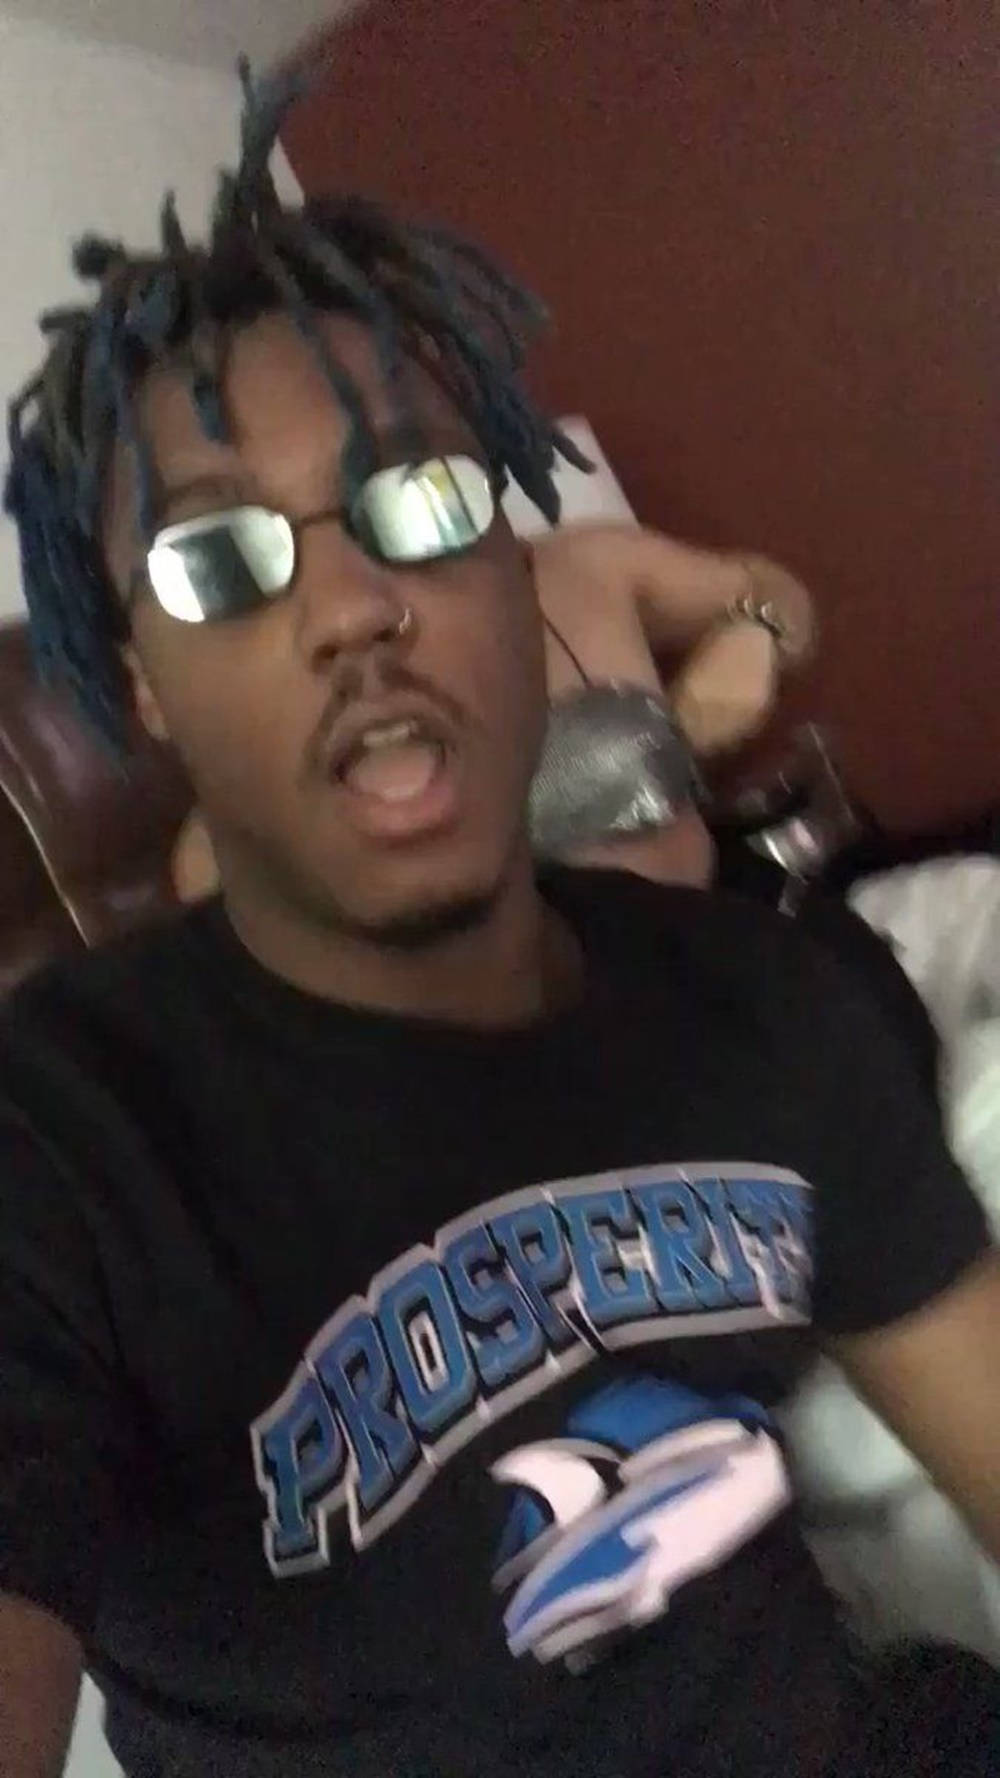 Juice Wrld 999 With Girl In Room Background